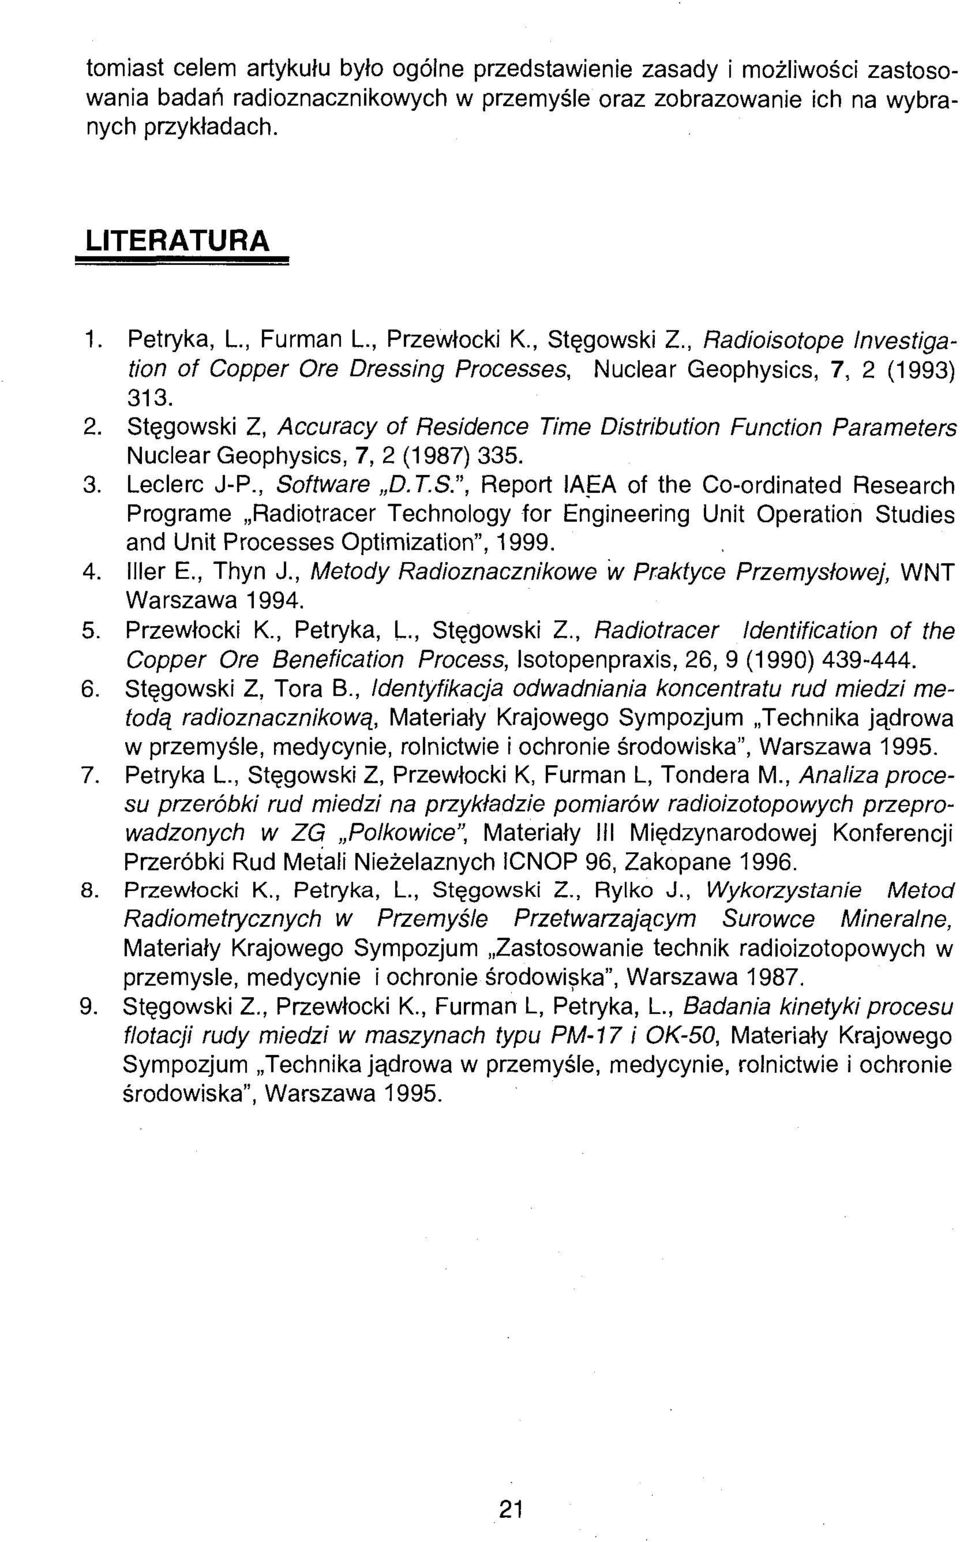 (1993) 313. 2. Stęgowski Z, Accuracy of Residence Time Distribution Function Parameters Nuclear Geophysics, 7, 2 (1987) 335. 3. Leclerc J-P., Software D.T.S.", Report IAEA of the Co-ordinated Research Programe Radiotracer Technology for Engineering Unit Operation Studies and Unit Processes Optimization", 1999.